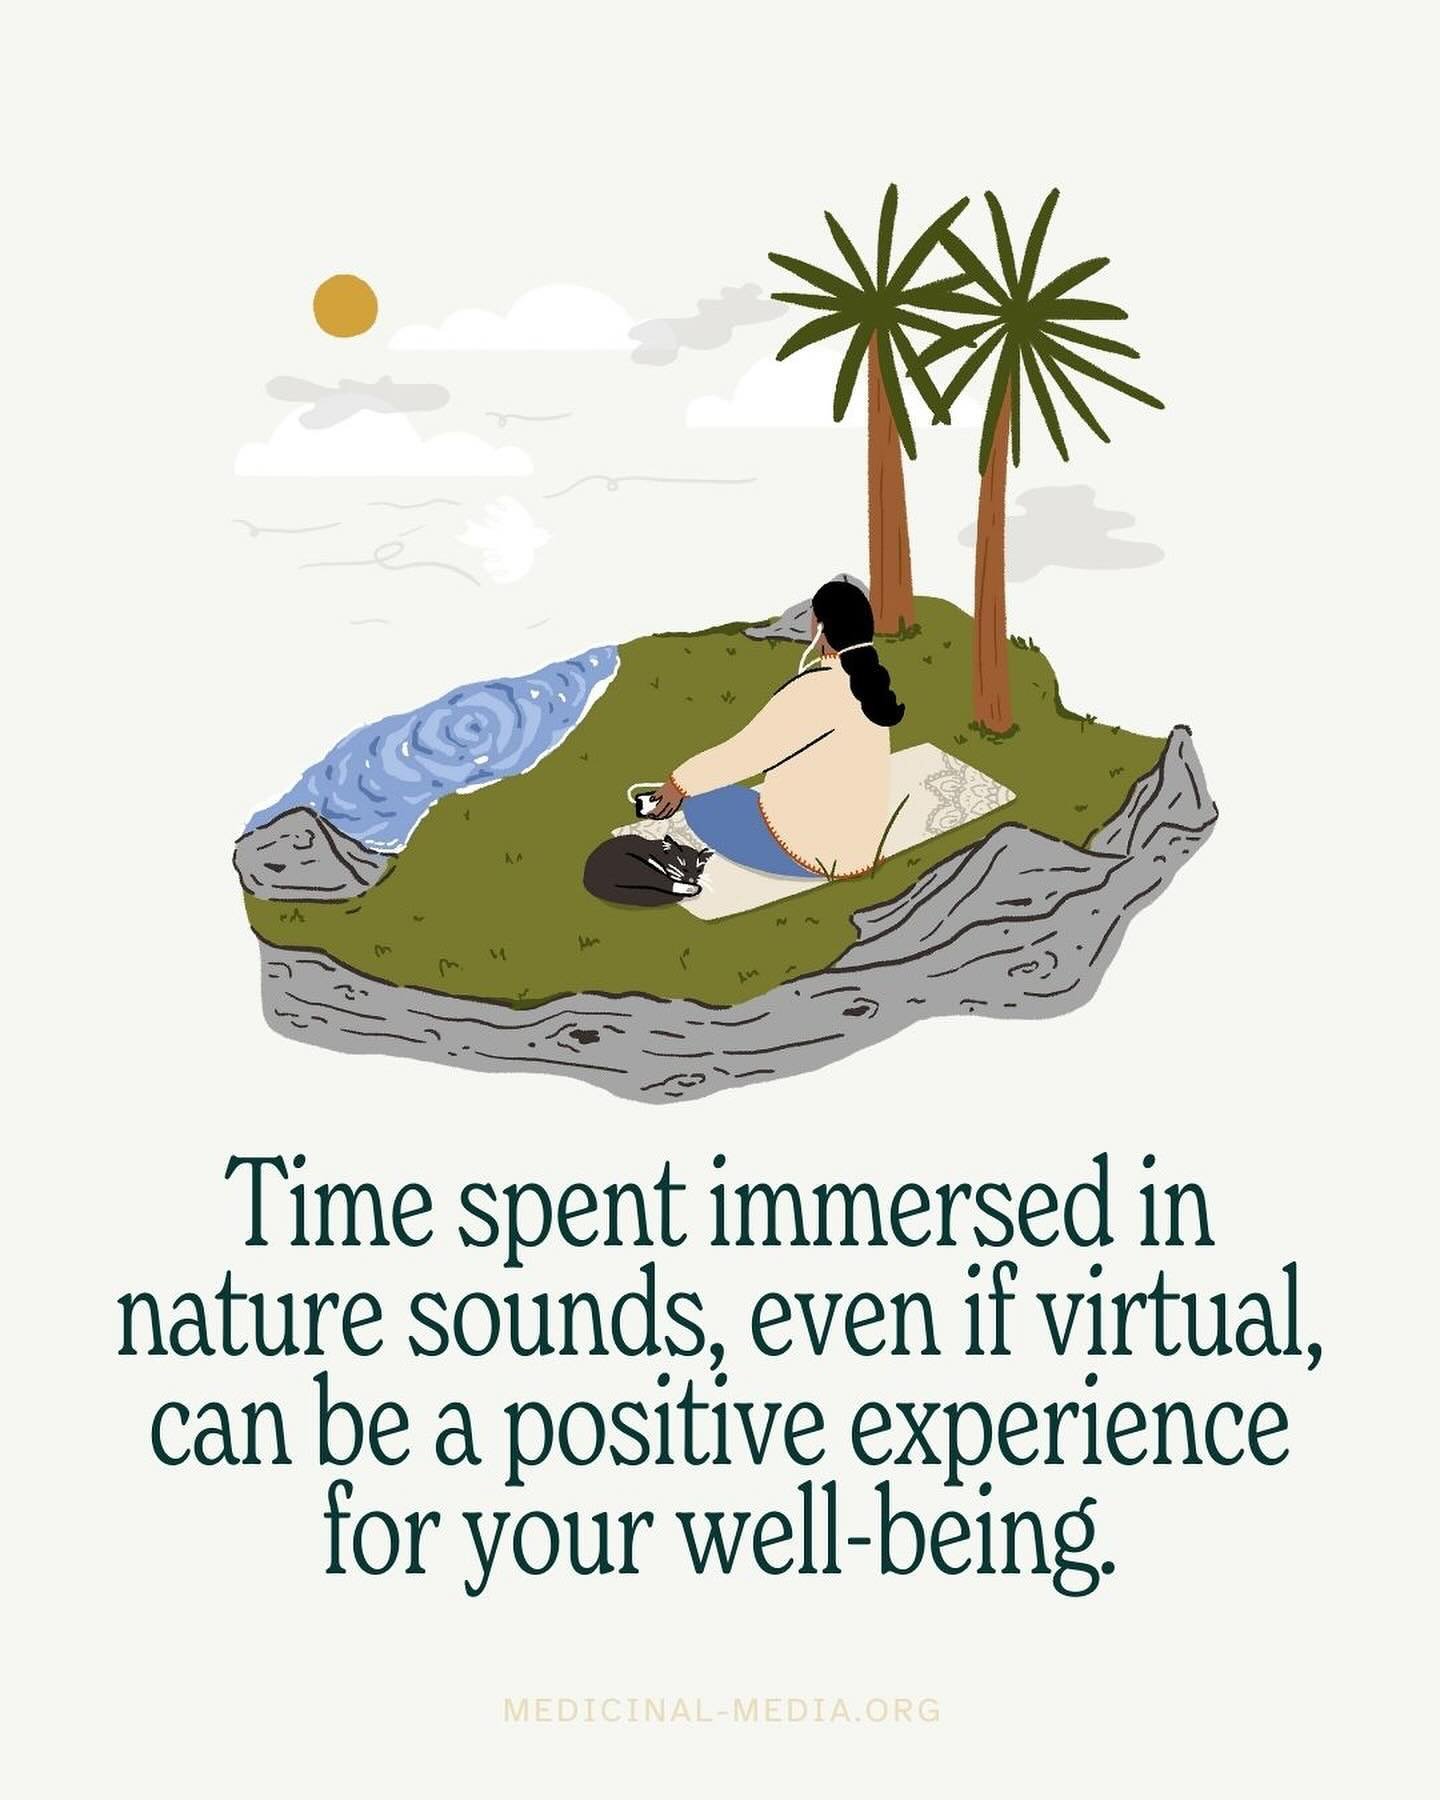 Need to hear some birds and touch some grass, but can&rsquo;t get to any?

In our latest story, we explore the healing power of nature sounds and the role they play in sound therapy. Rustling leaves, chirping birds, and flowing water &mdash; we invit